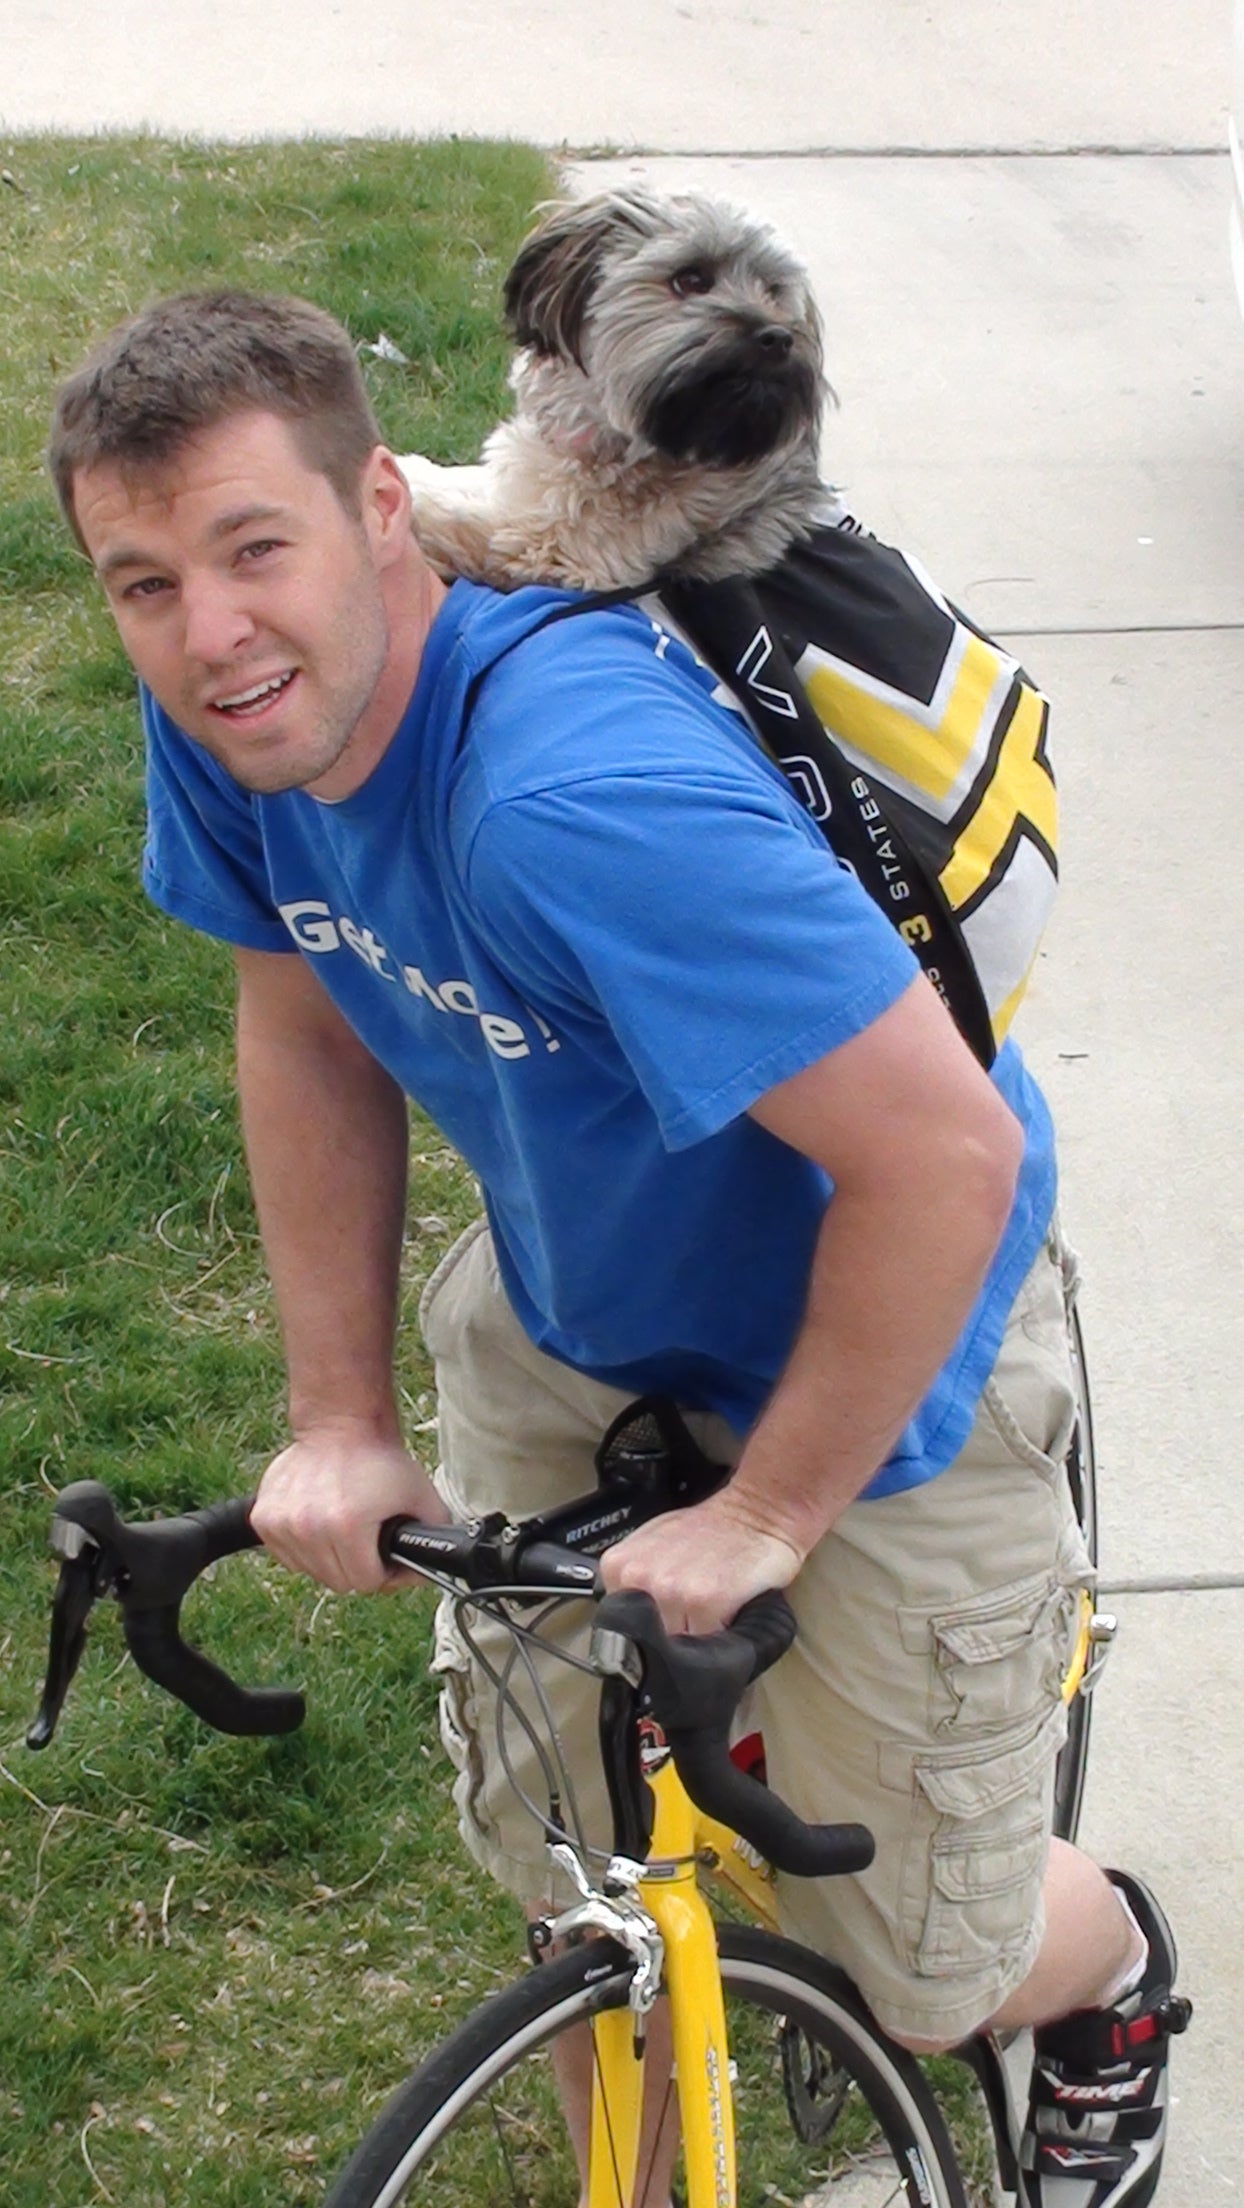 Joseph biking with Daisy in a drawstring backpack